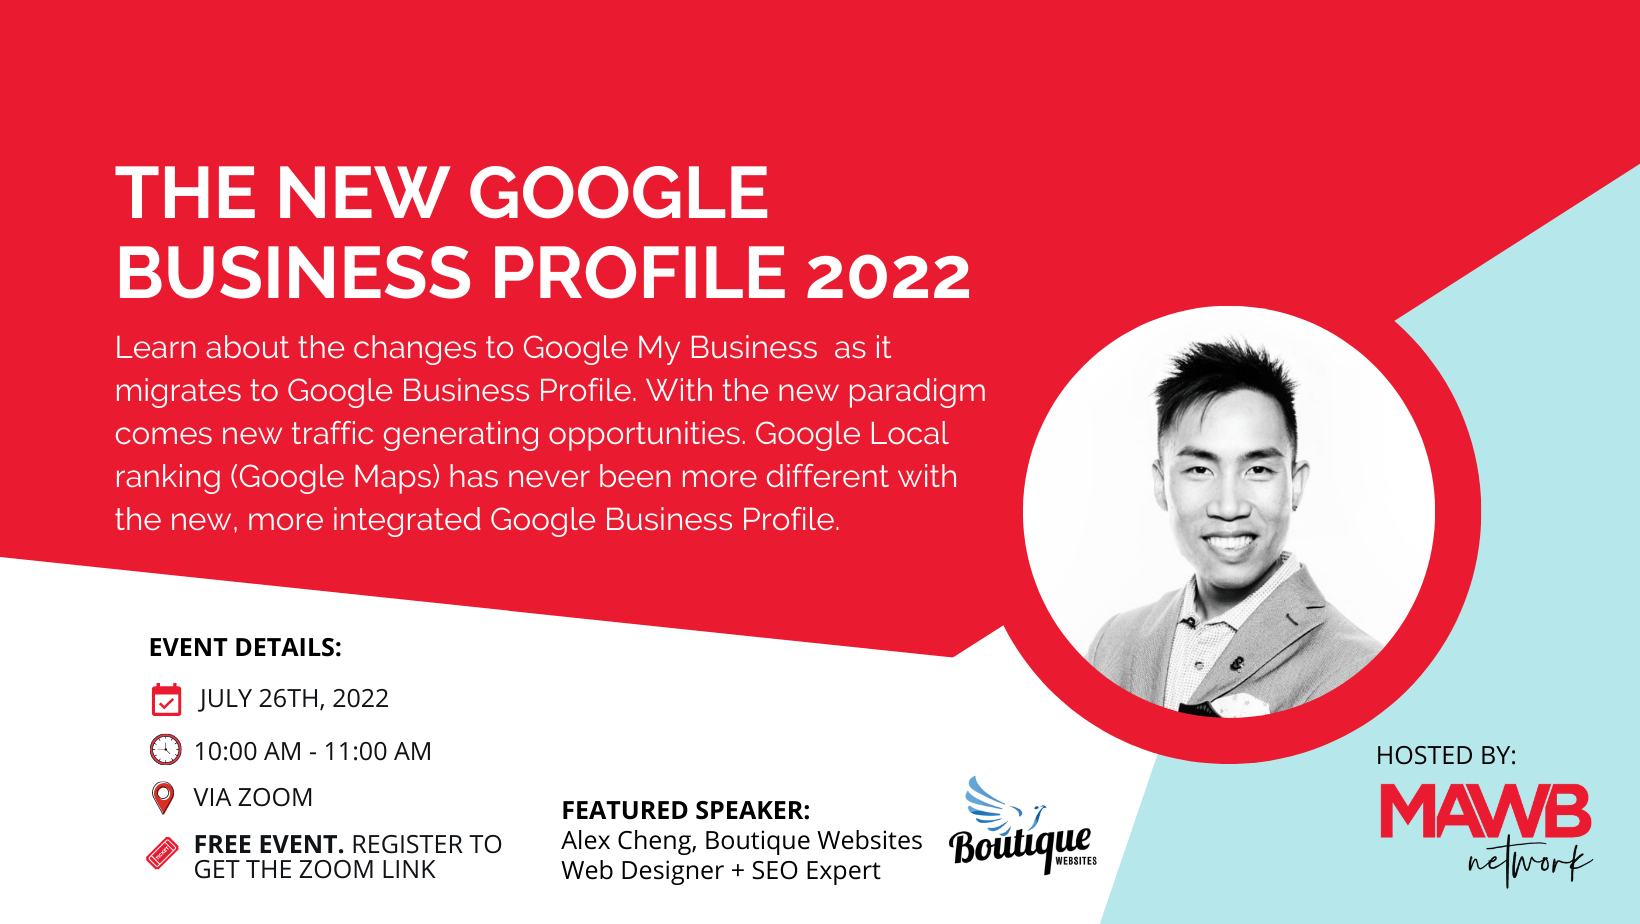 The New Google Business Profile 2022